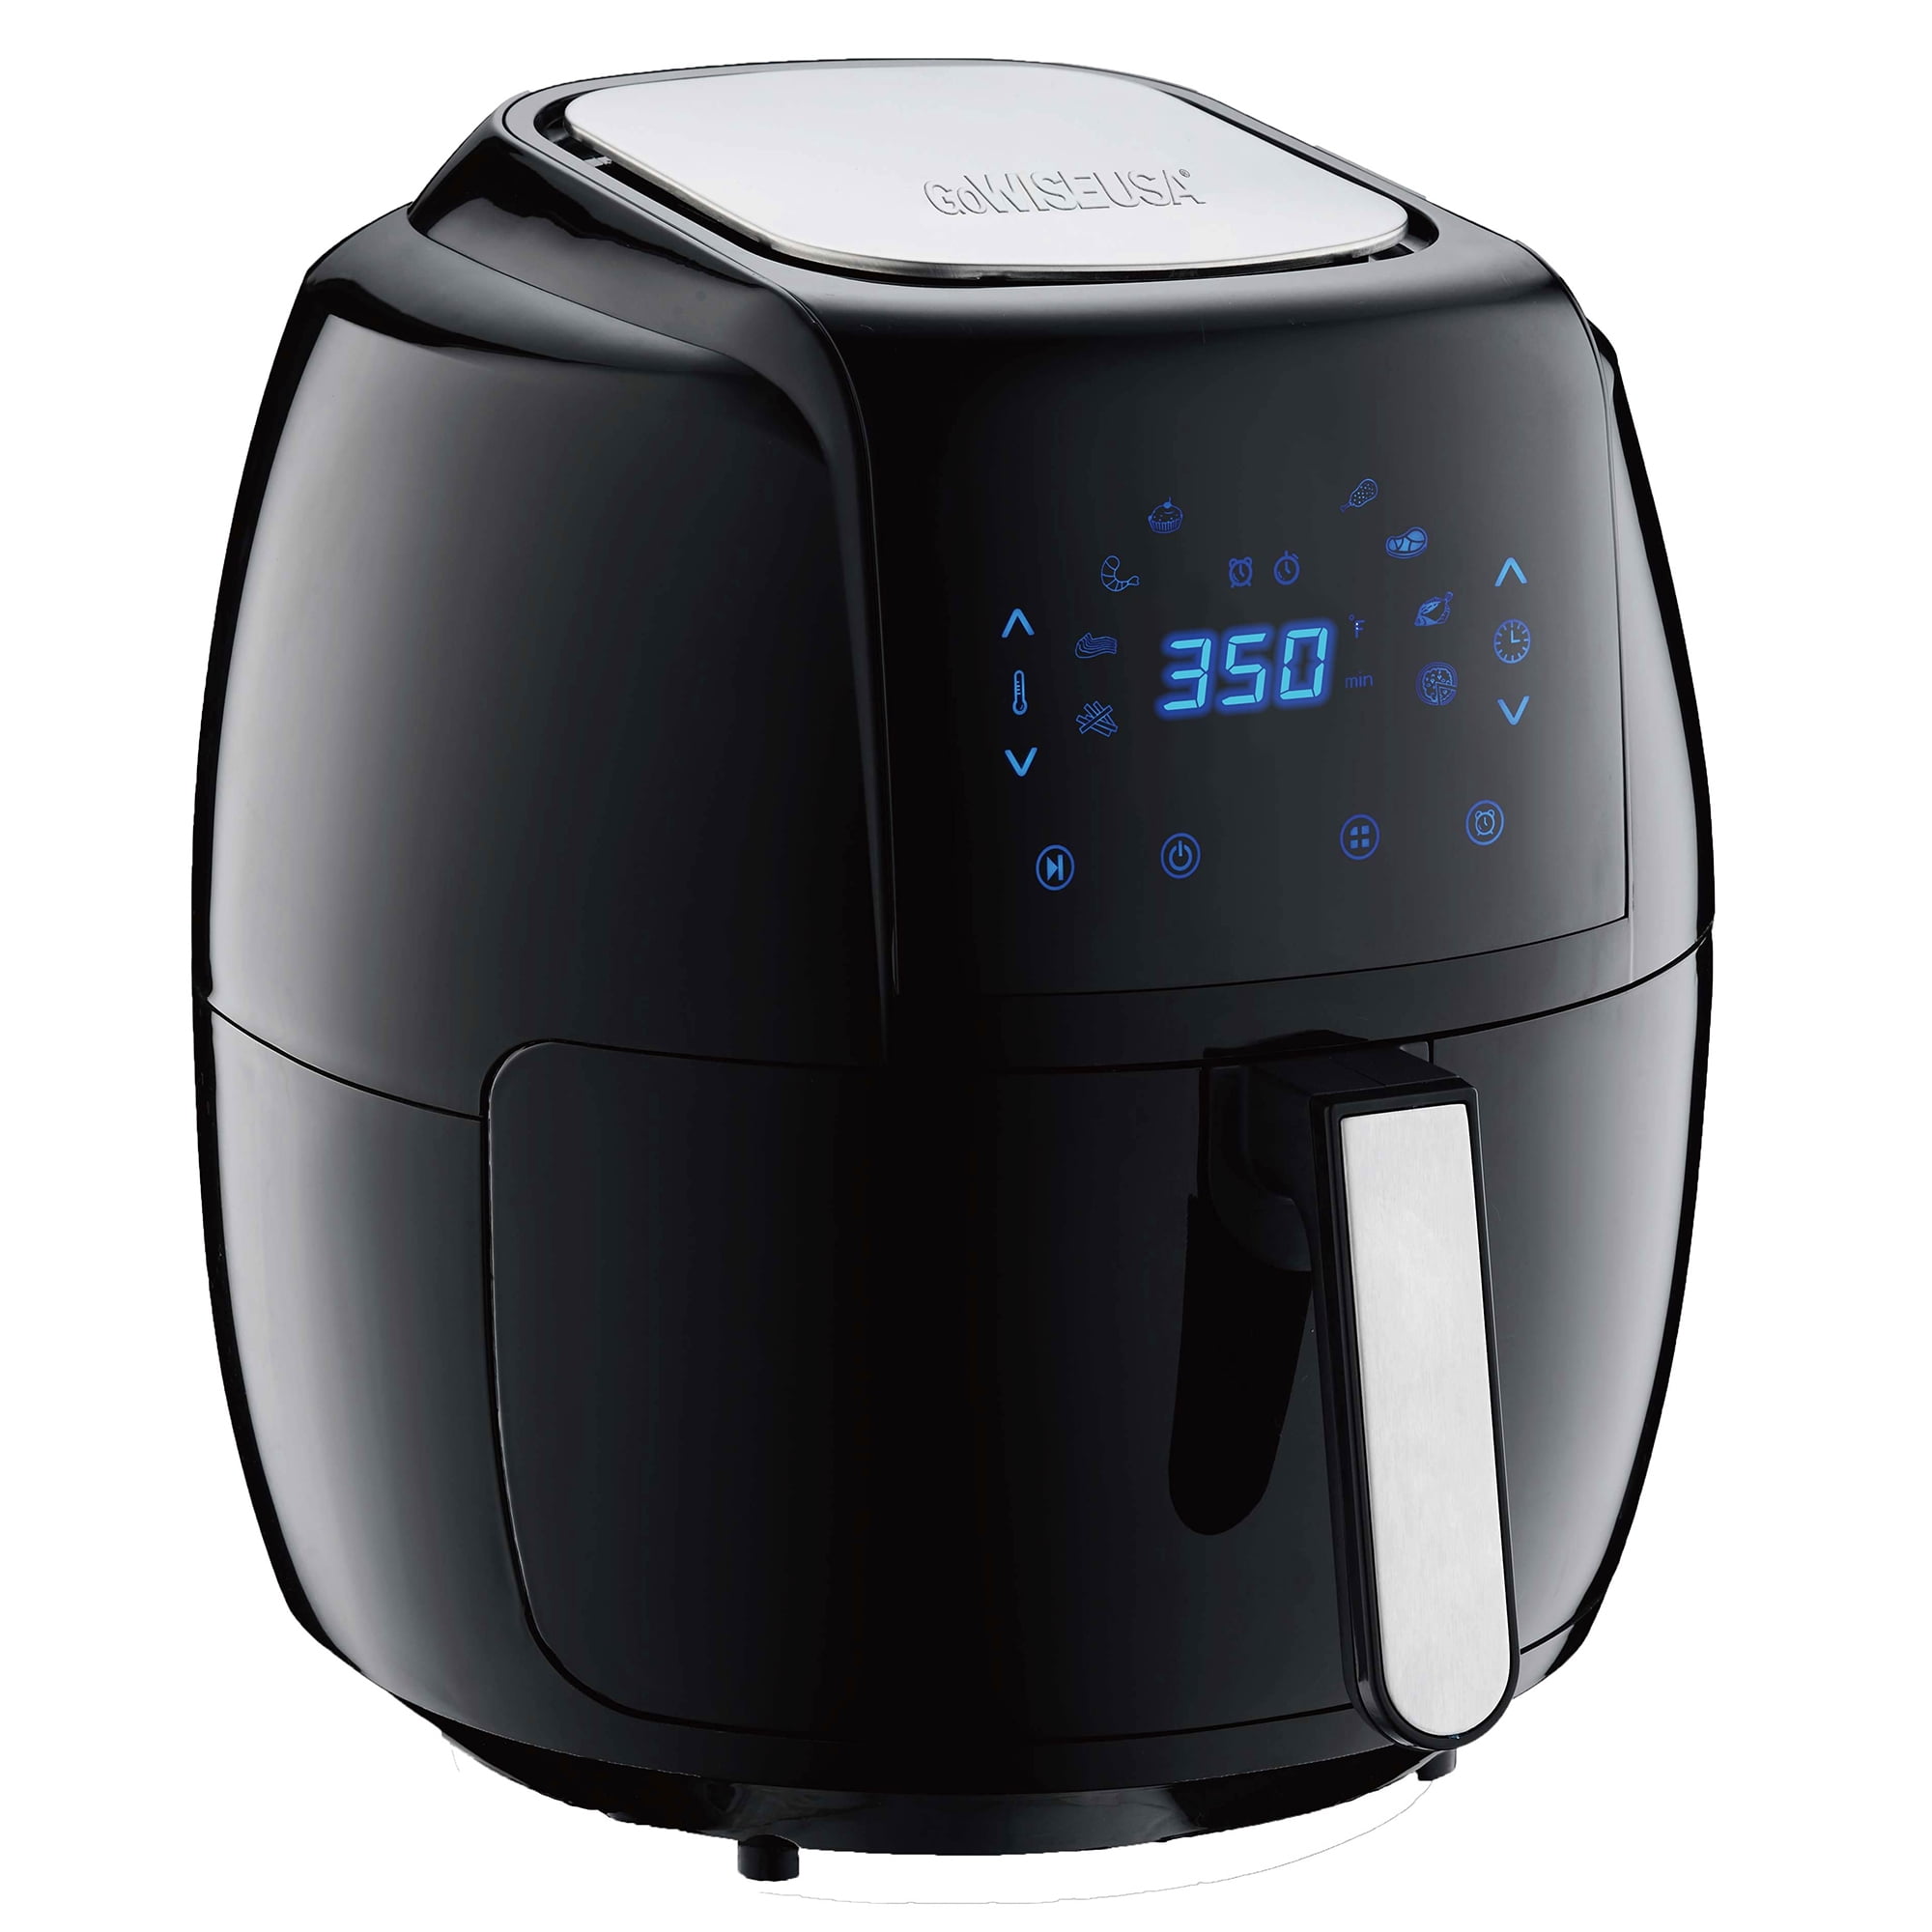 GoWISE USA 3.7-Quart Programmable Air Fryer with 8 Cook Presets